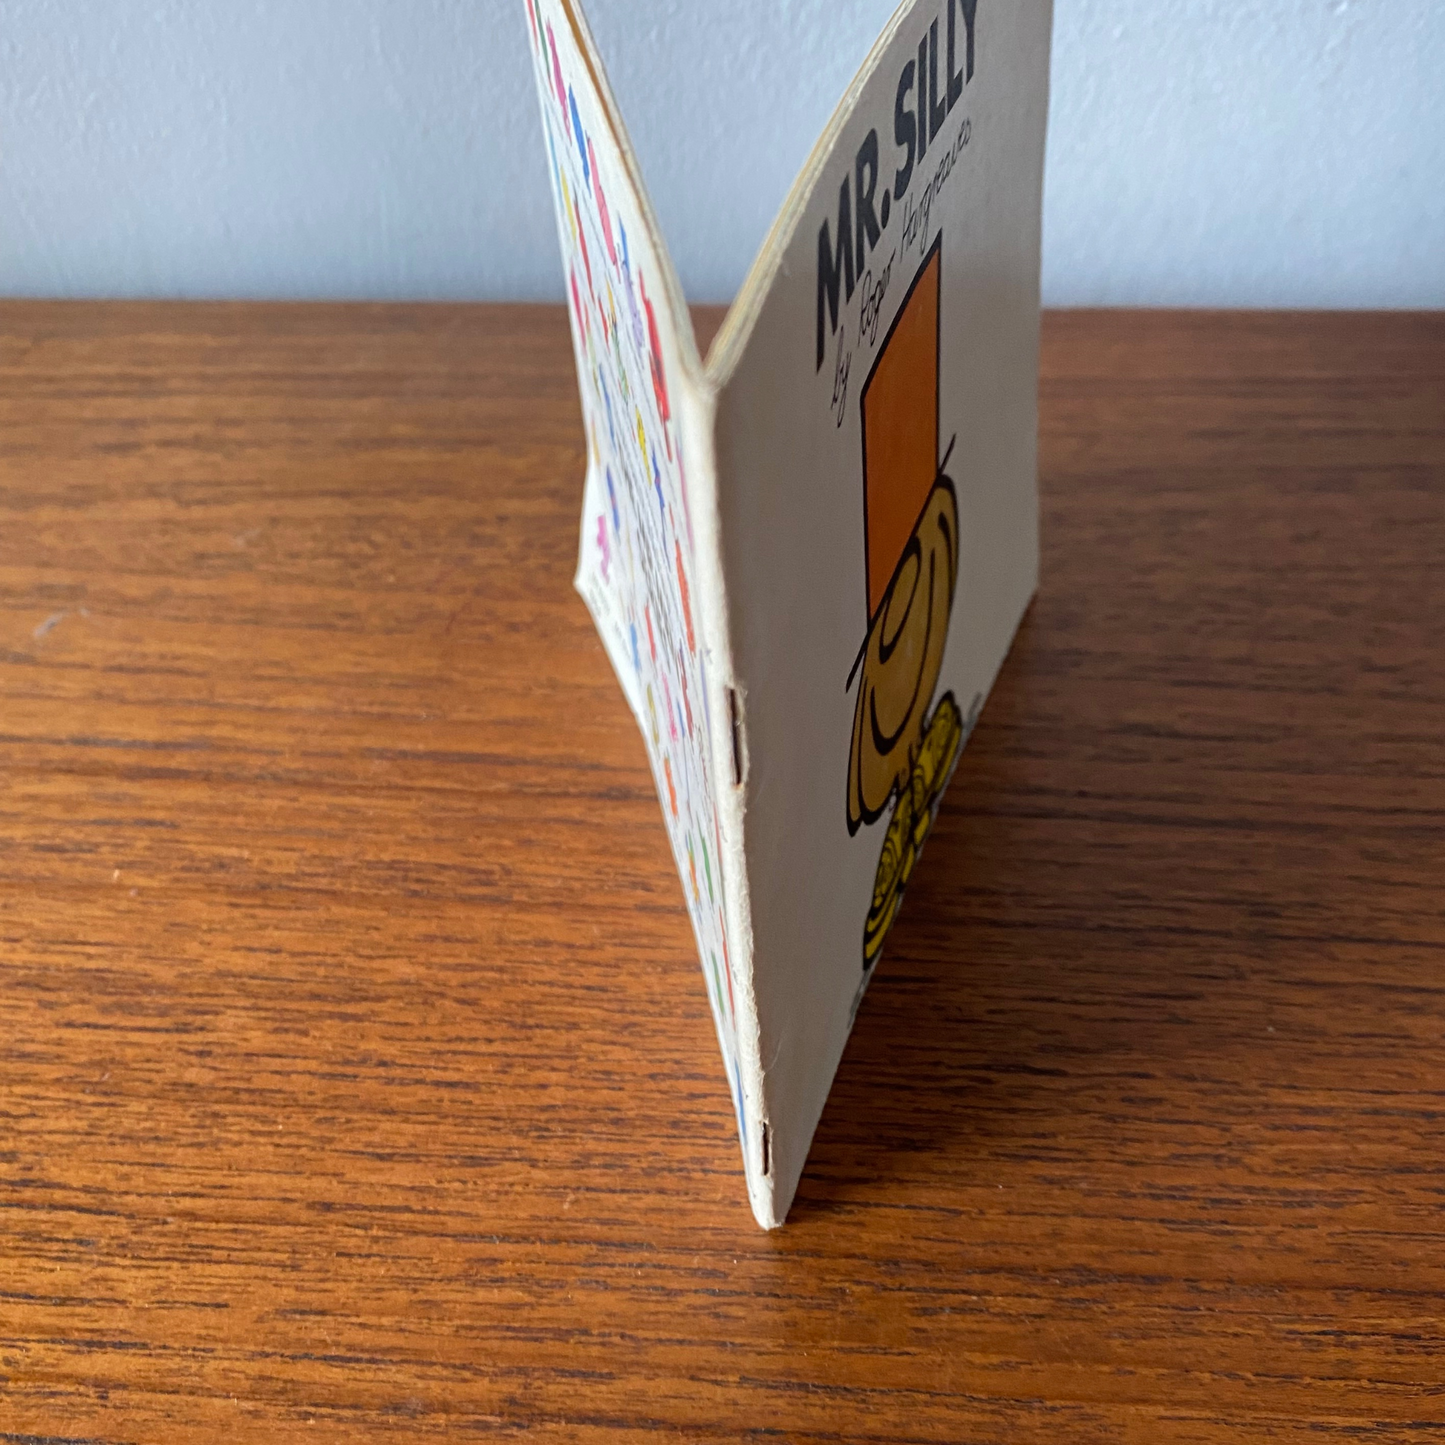 Nostalgic Mr. Men Storybook -  Mr Silly   - 1972 Edition View of the spine 